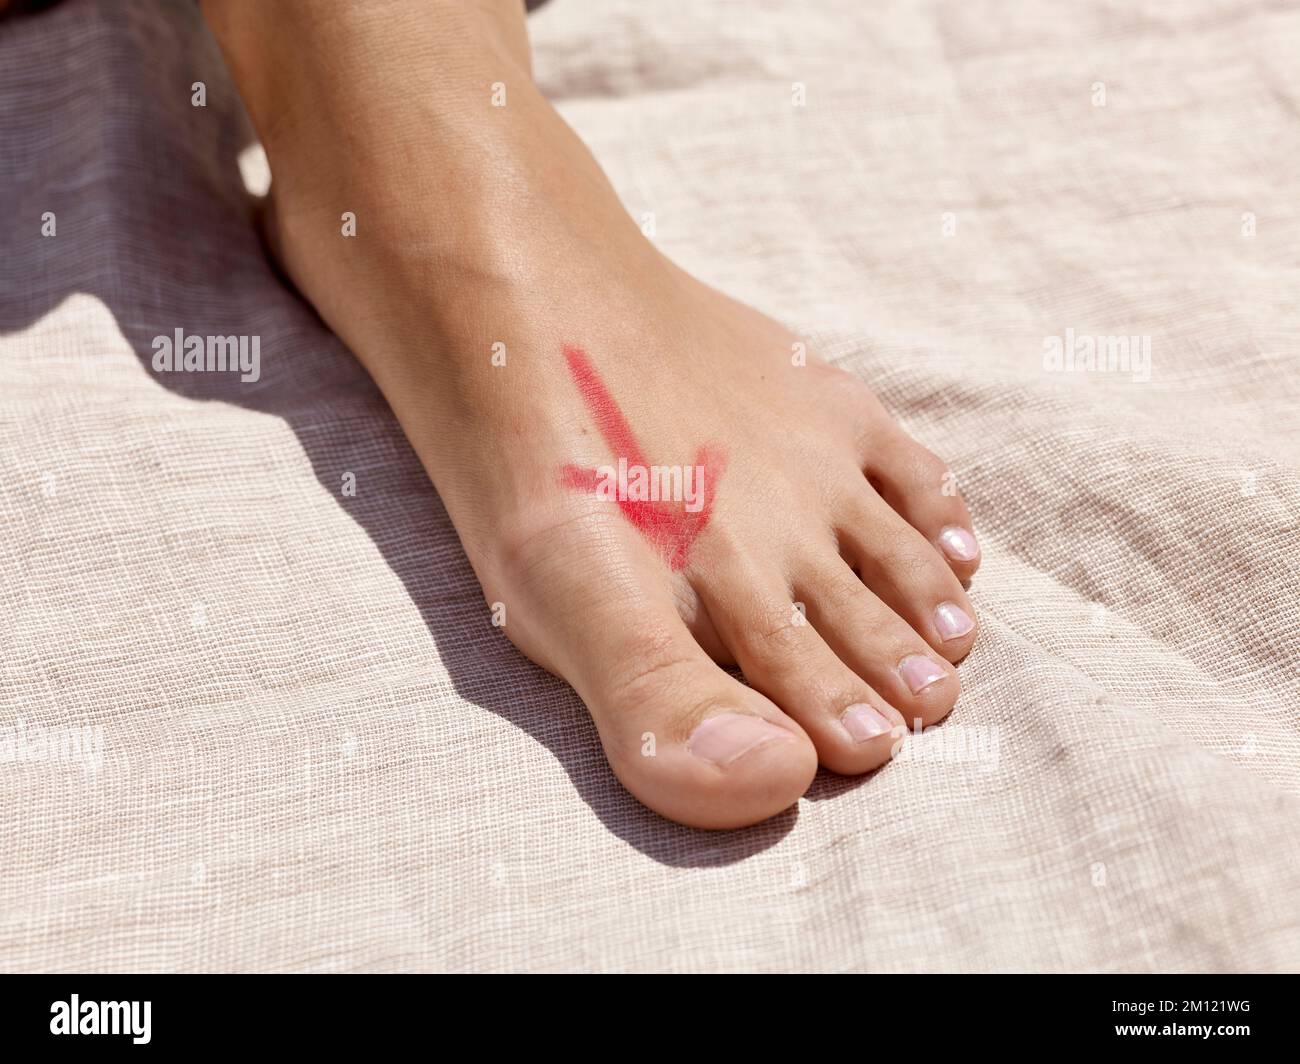 Barefoot walking - close-up of a woman's foot with reflexology zone drawn on the back of the foot in the shape of an arrow Stock Photo